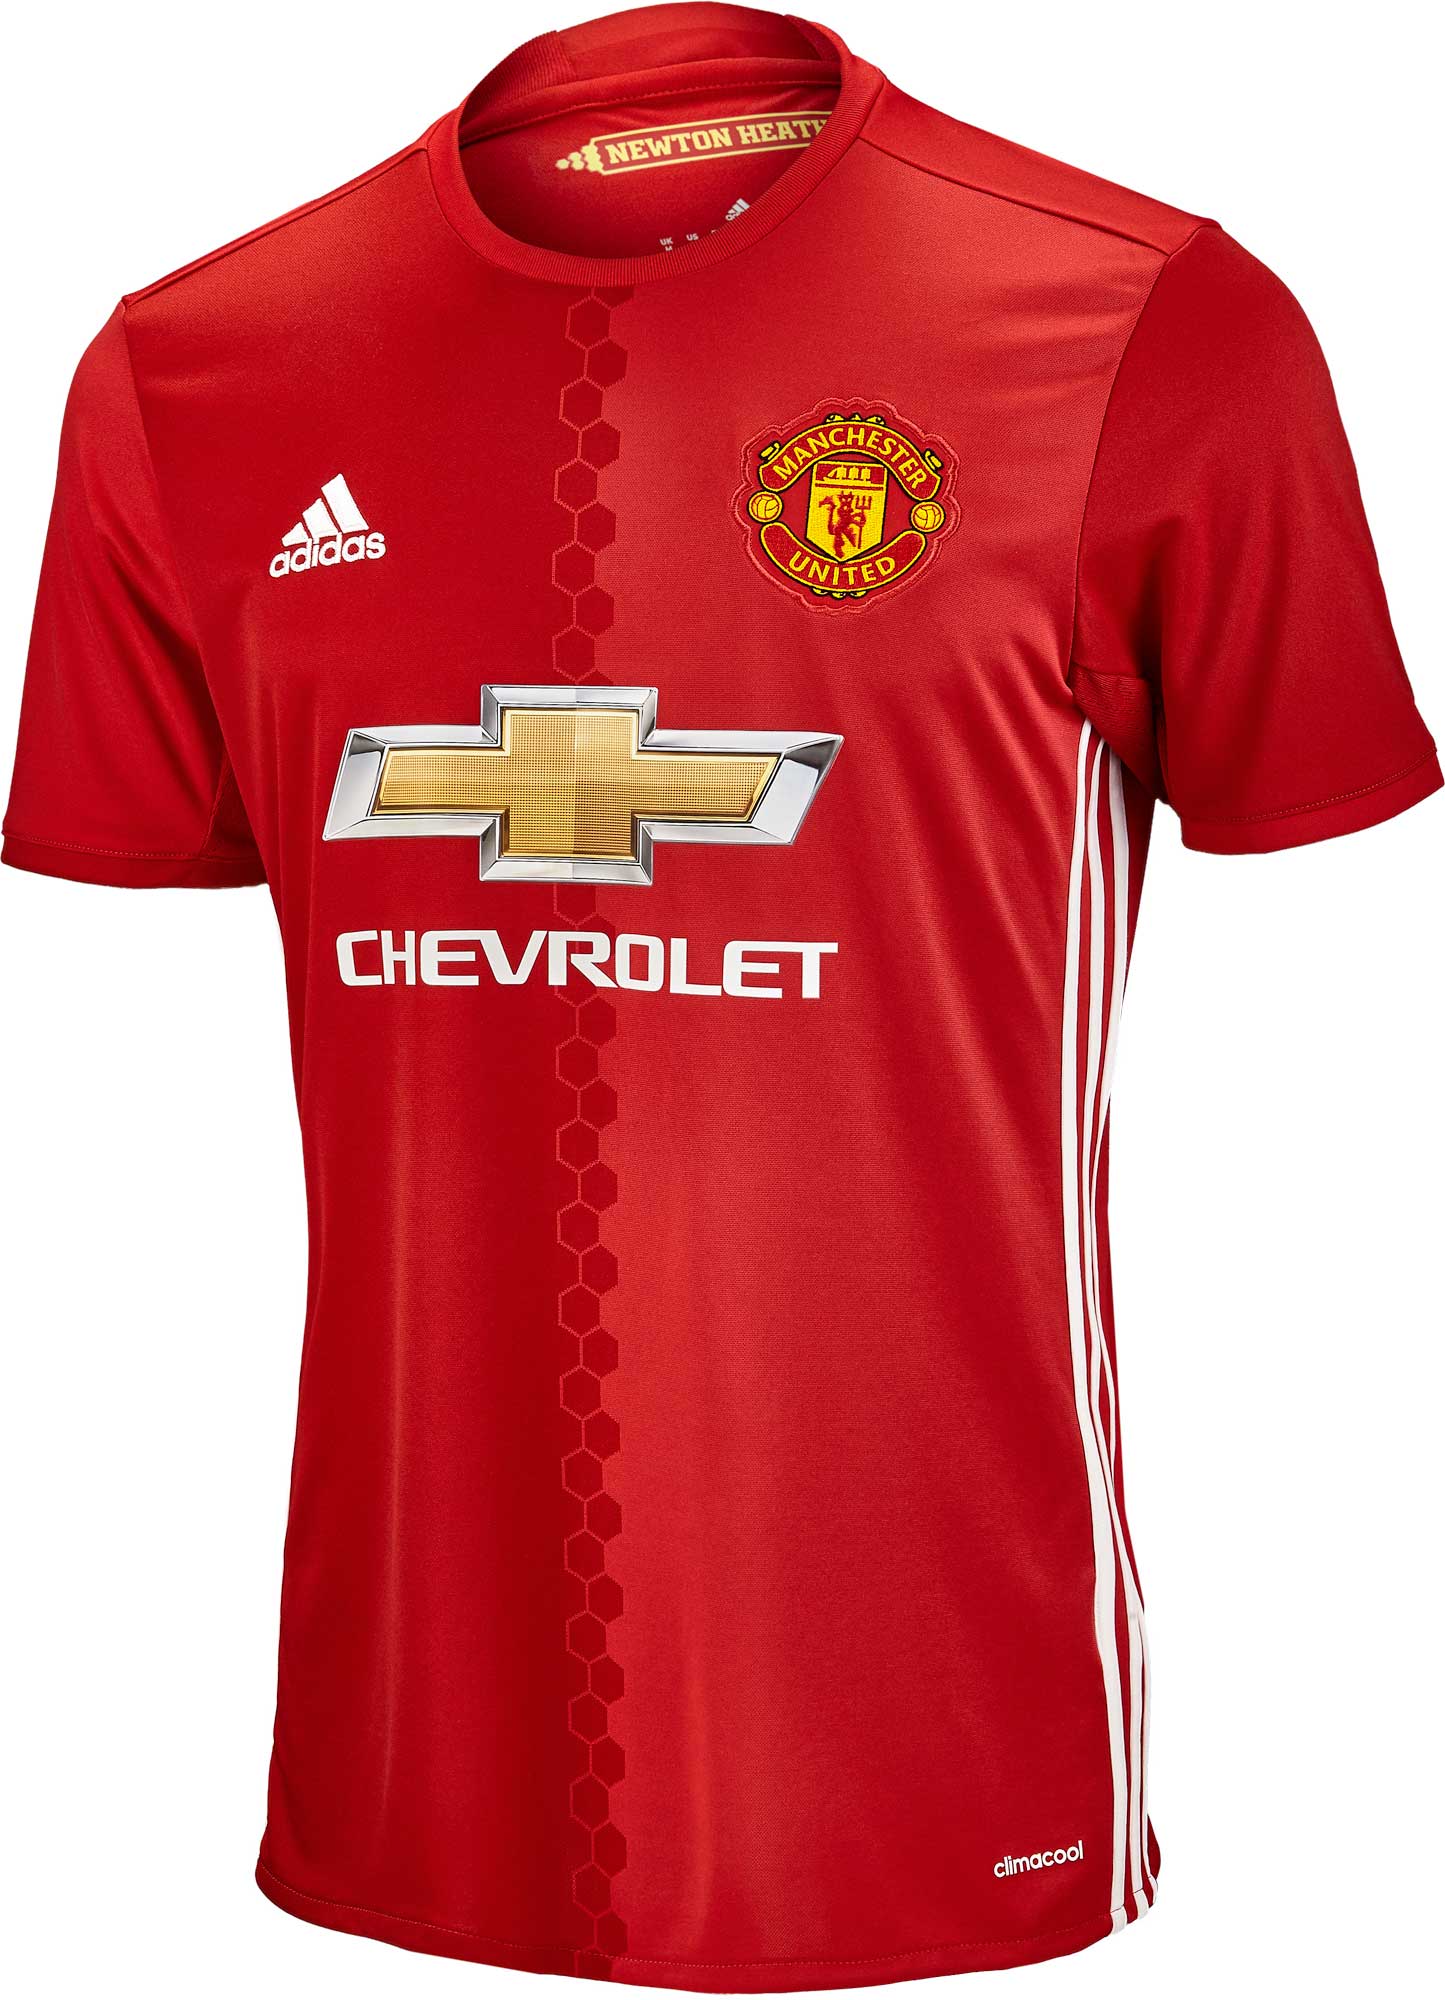 man united youth jersey